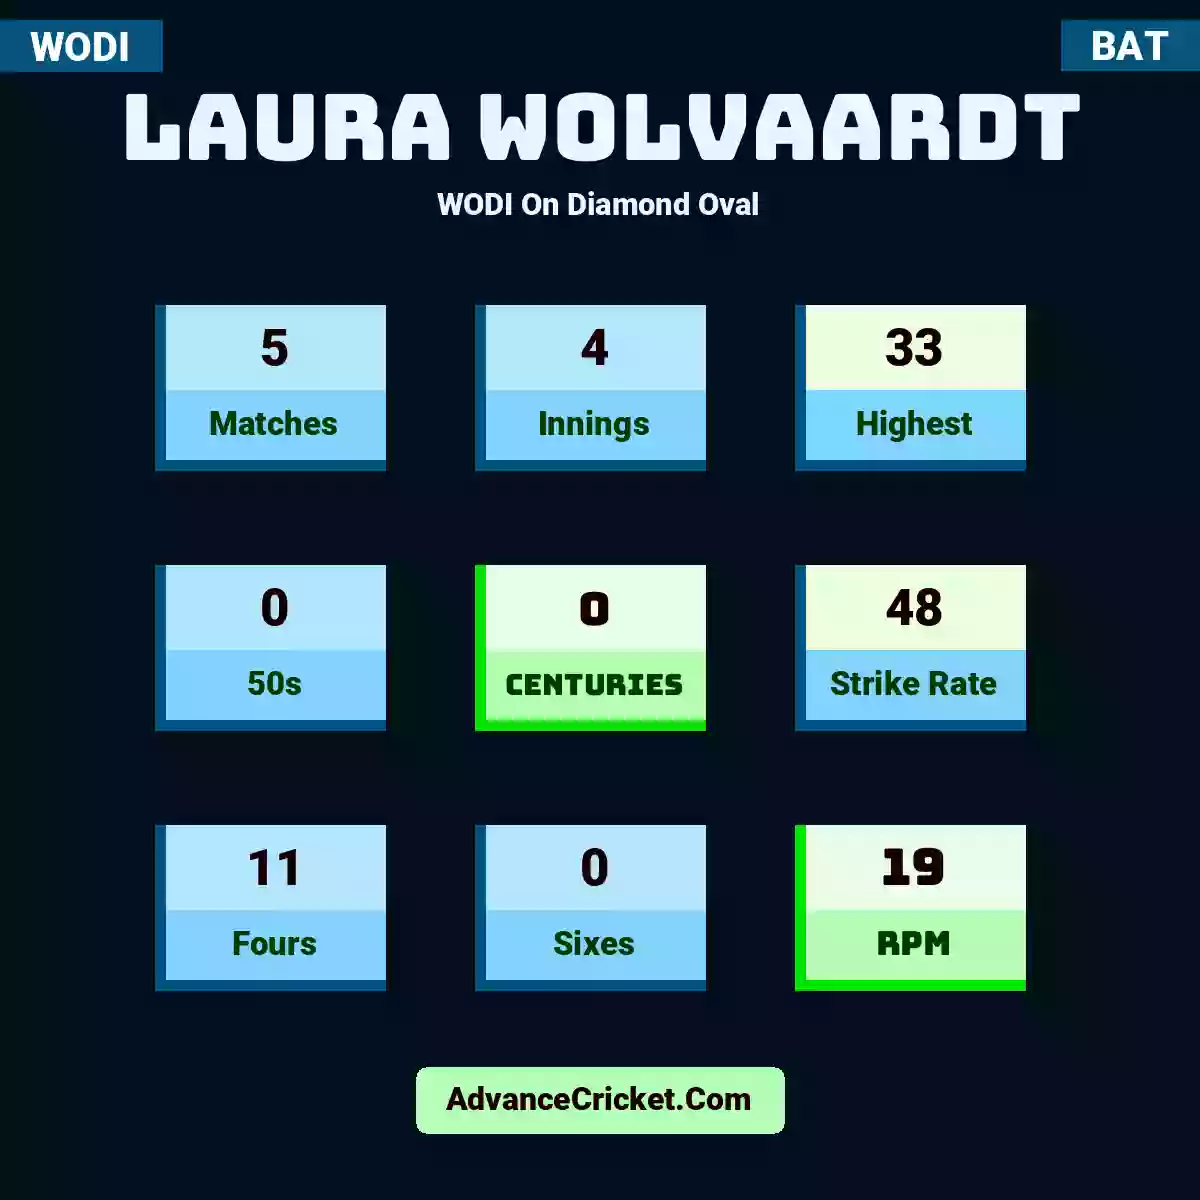 Laura Wolvaardt WODI  On Diamond Oval, Laura Wolvaardt played 5 matches, scored 33 runs as highest, 0 half-centuries, and 0 centuries, with a strike rate of 48. L.Wolvaardt hit 11 fours and 0 sixes, with an RPM of 19.